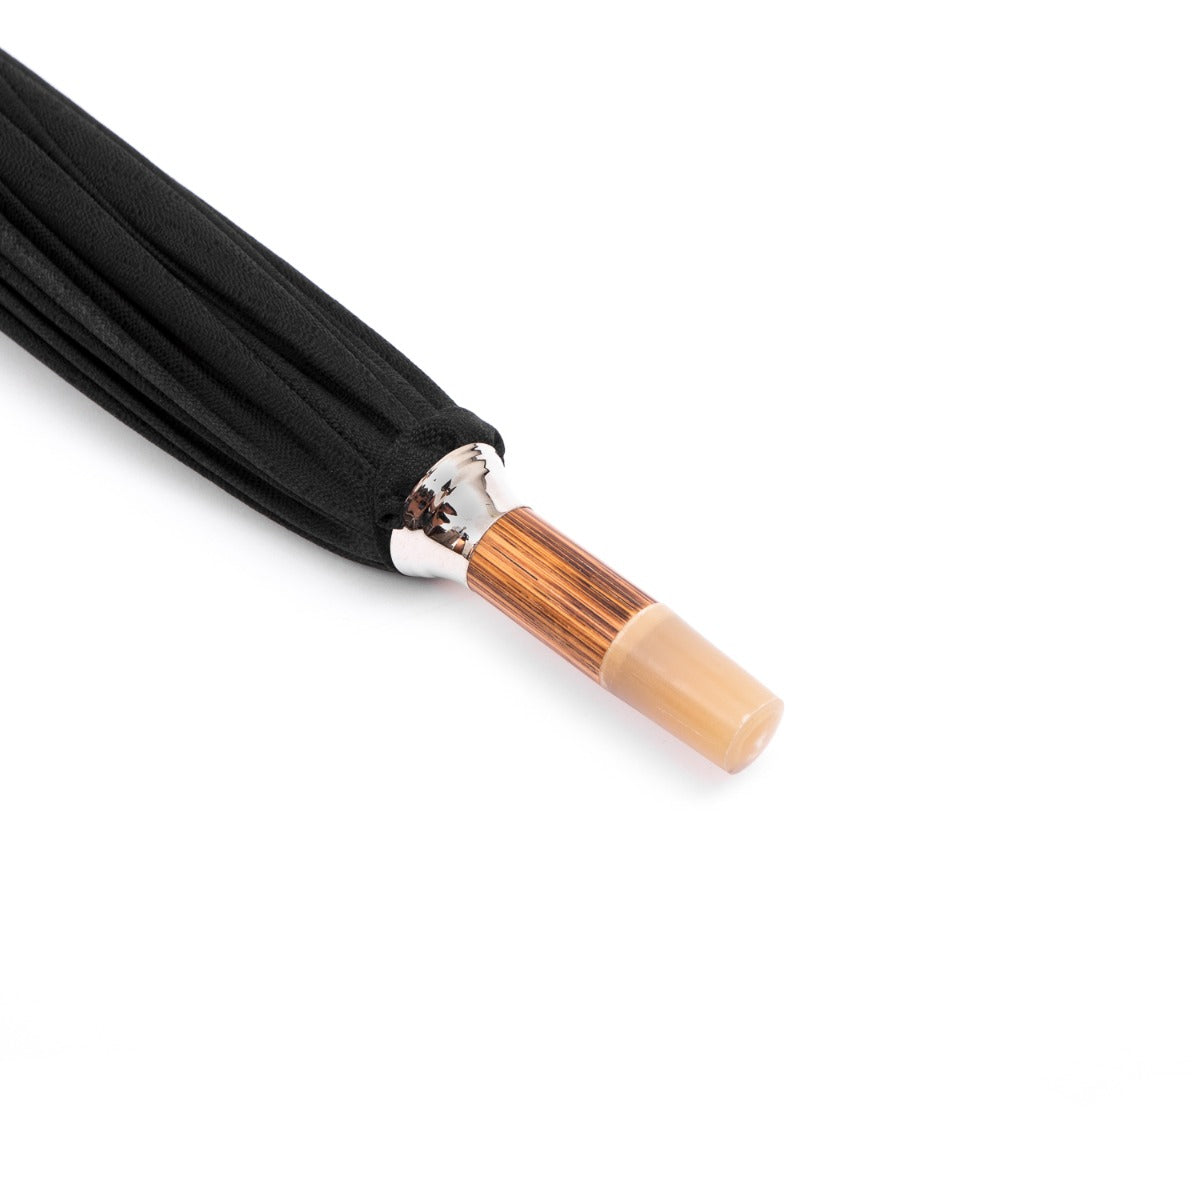 A black tassel on a white background featuring a Manila Root Solid Stick w/ Imperial Black Canopy umbrella by KirbyAllison.com.